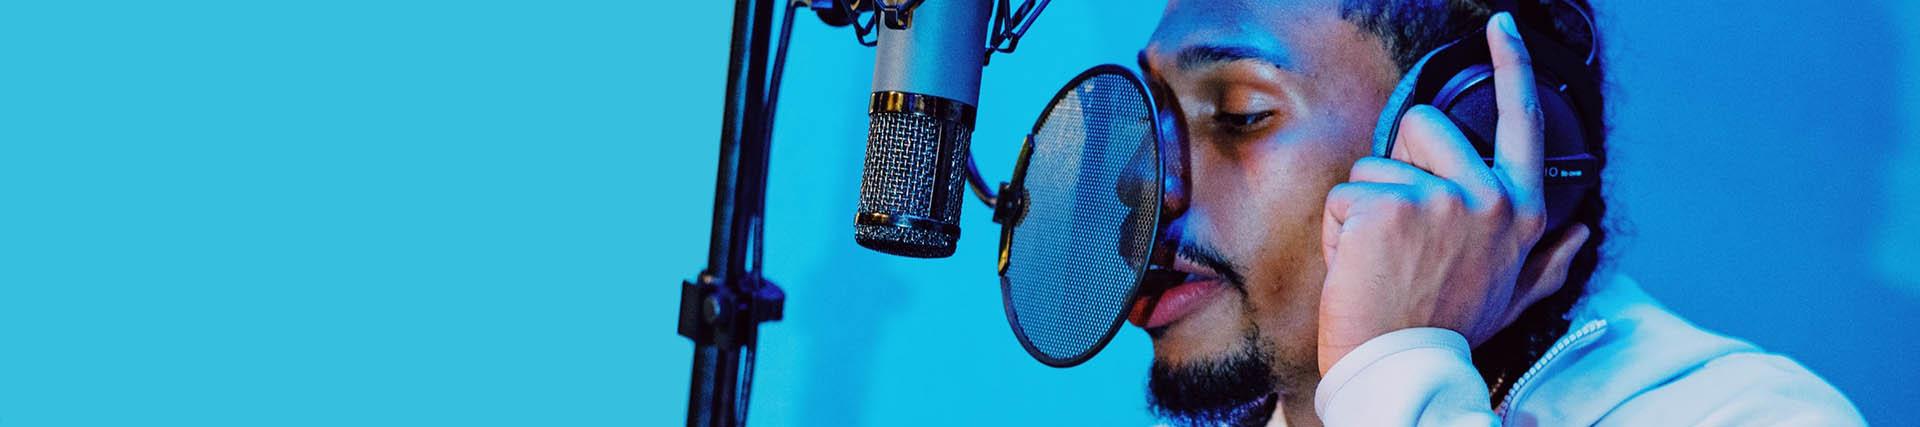 A singer records vocals in a recording studio using a pop shield in front of the mic